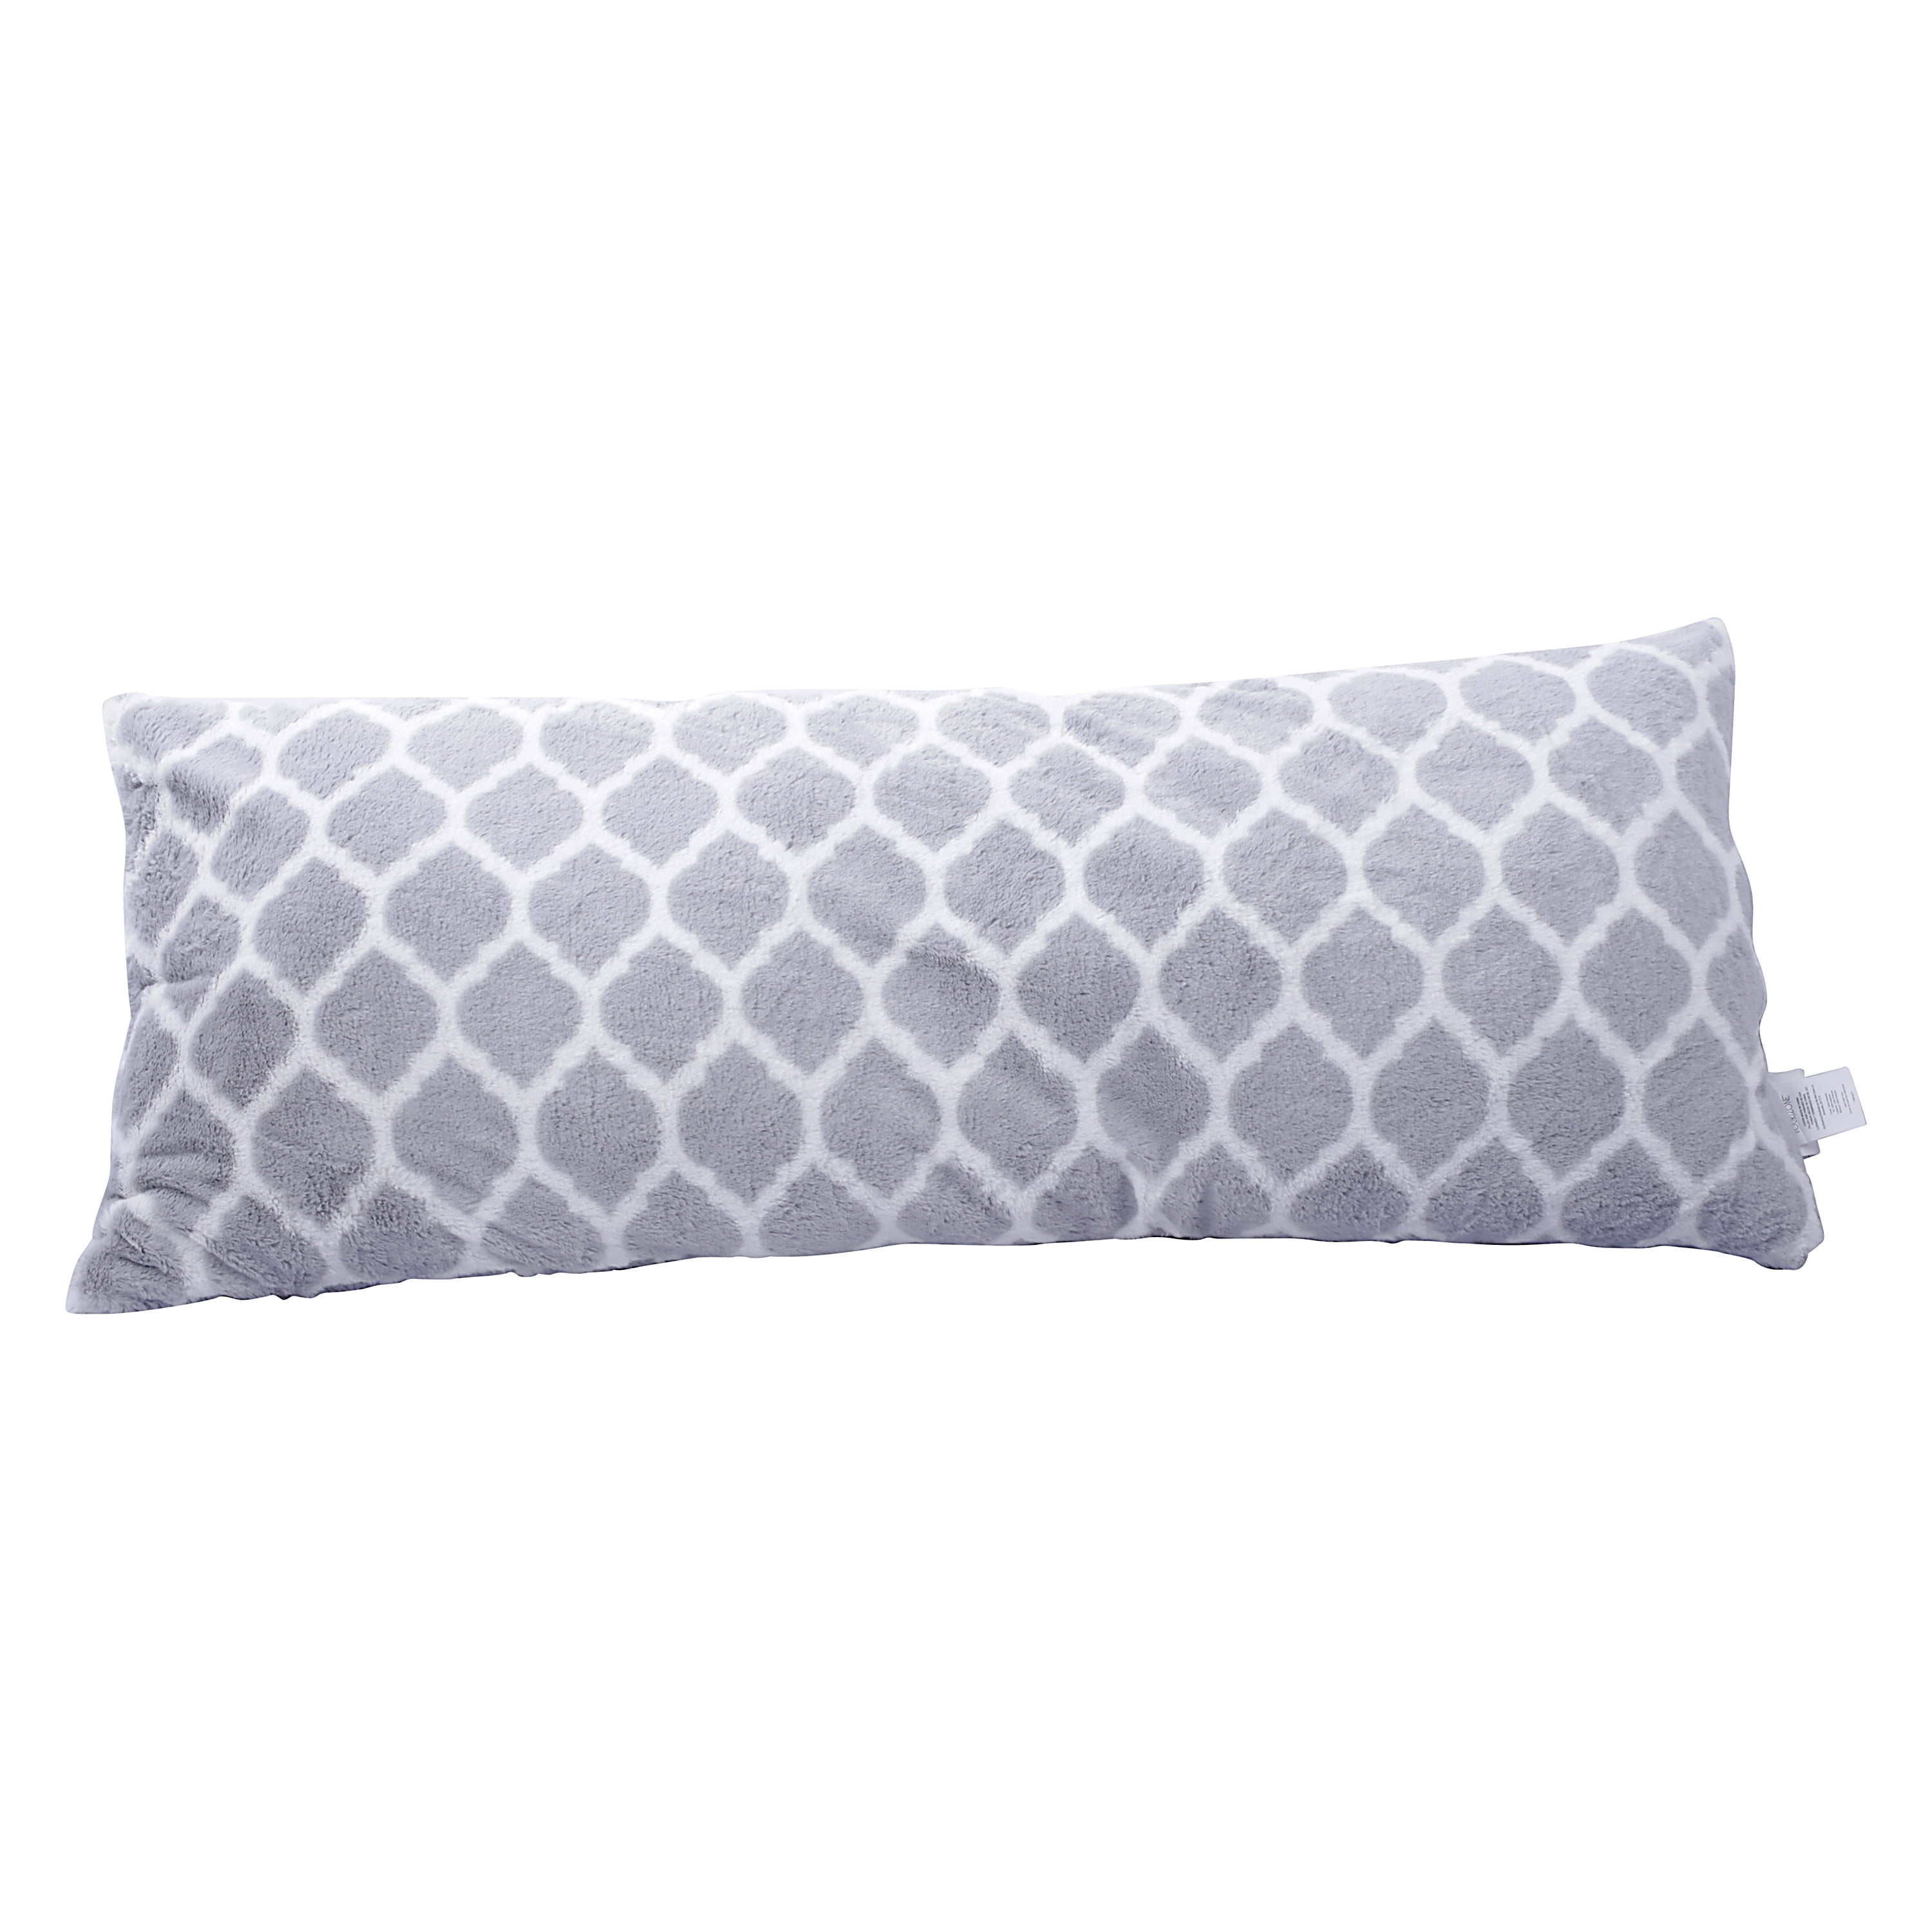 Your Zone Trellis Patterned Body Pillow 